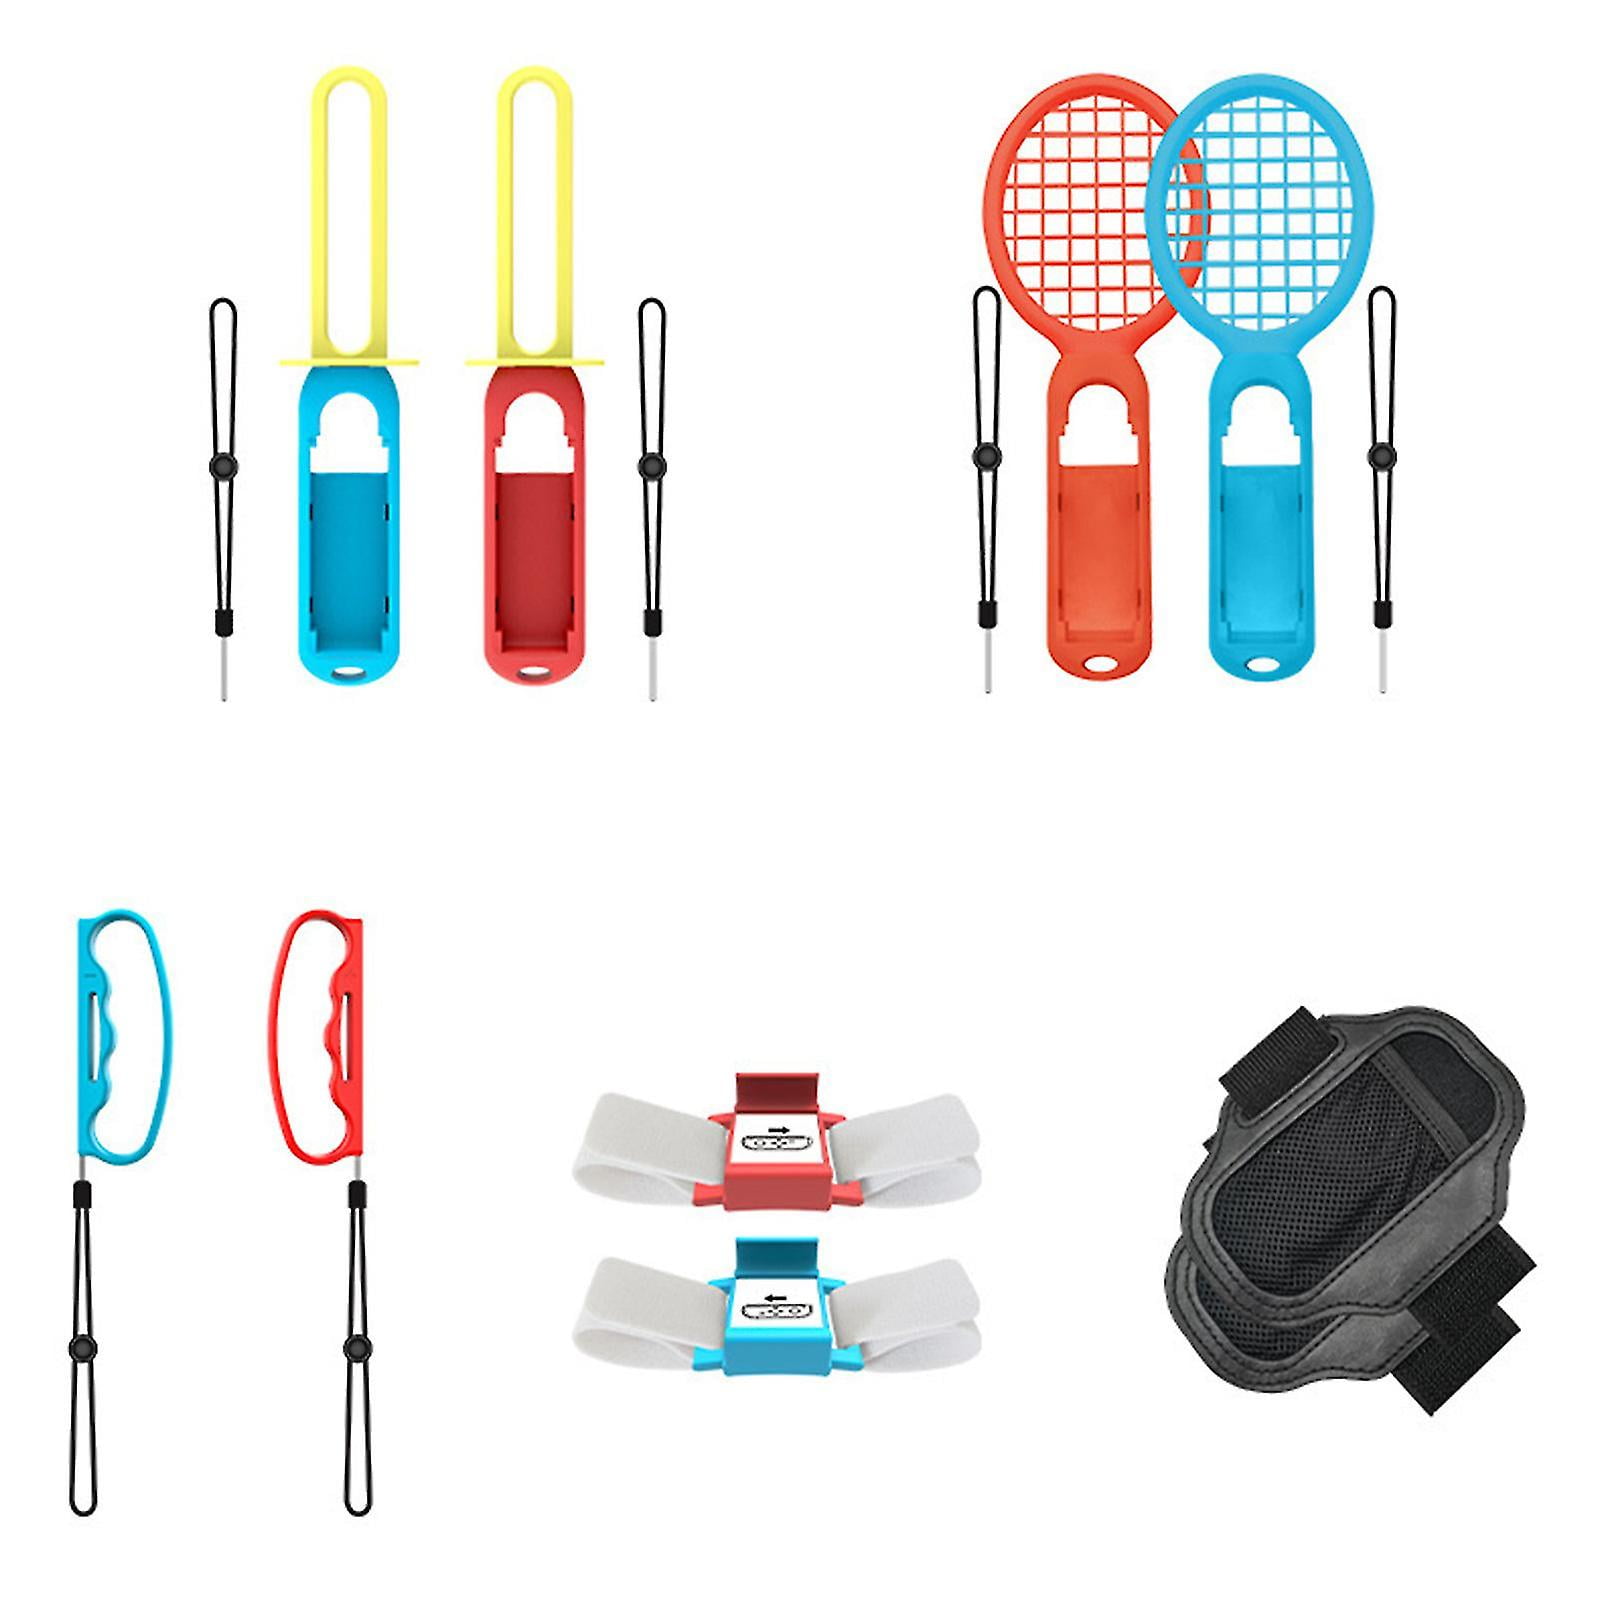 Nintendo Switch Sports Game Accessories Bundle, 10 In 1 Sport Kit